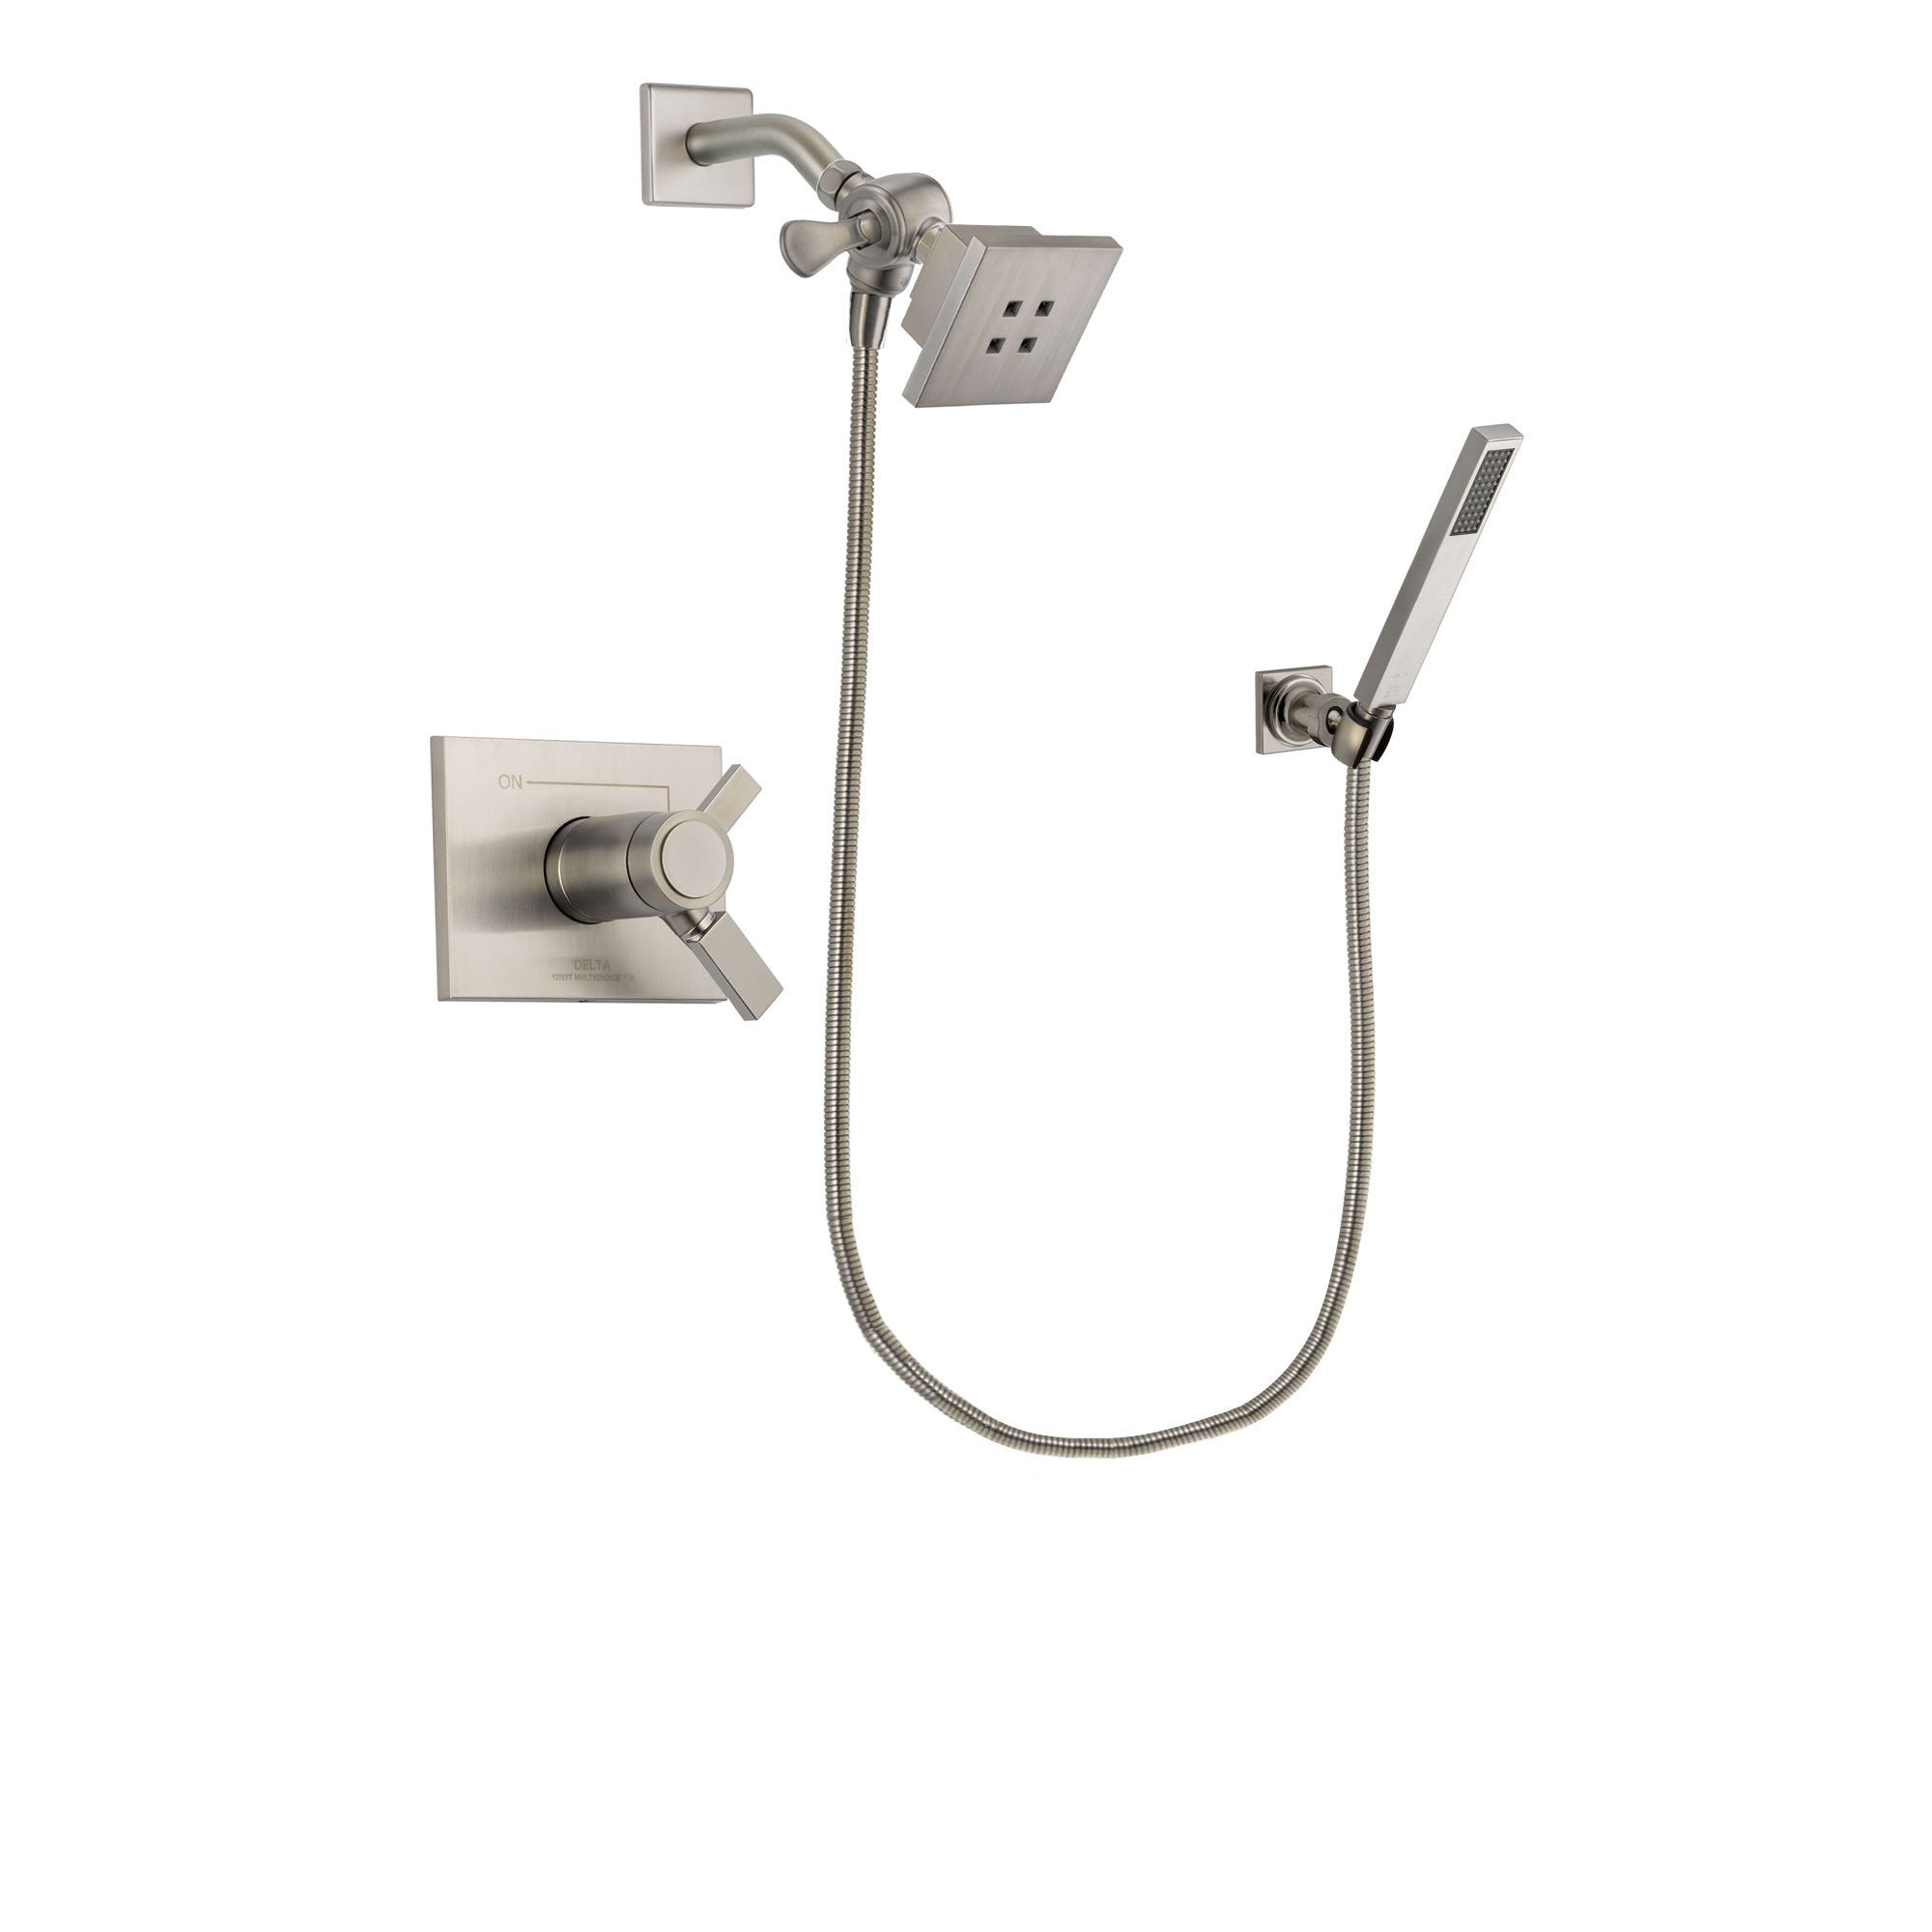 Delta Vero Stainless Steel Finish Thermostatic Shower Faucet System Package with Square Showerhead and Wall-Mount Handheld Shower Stick Includes Rough-in Valve DSP2168V